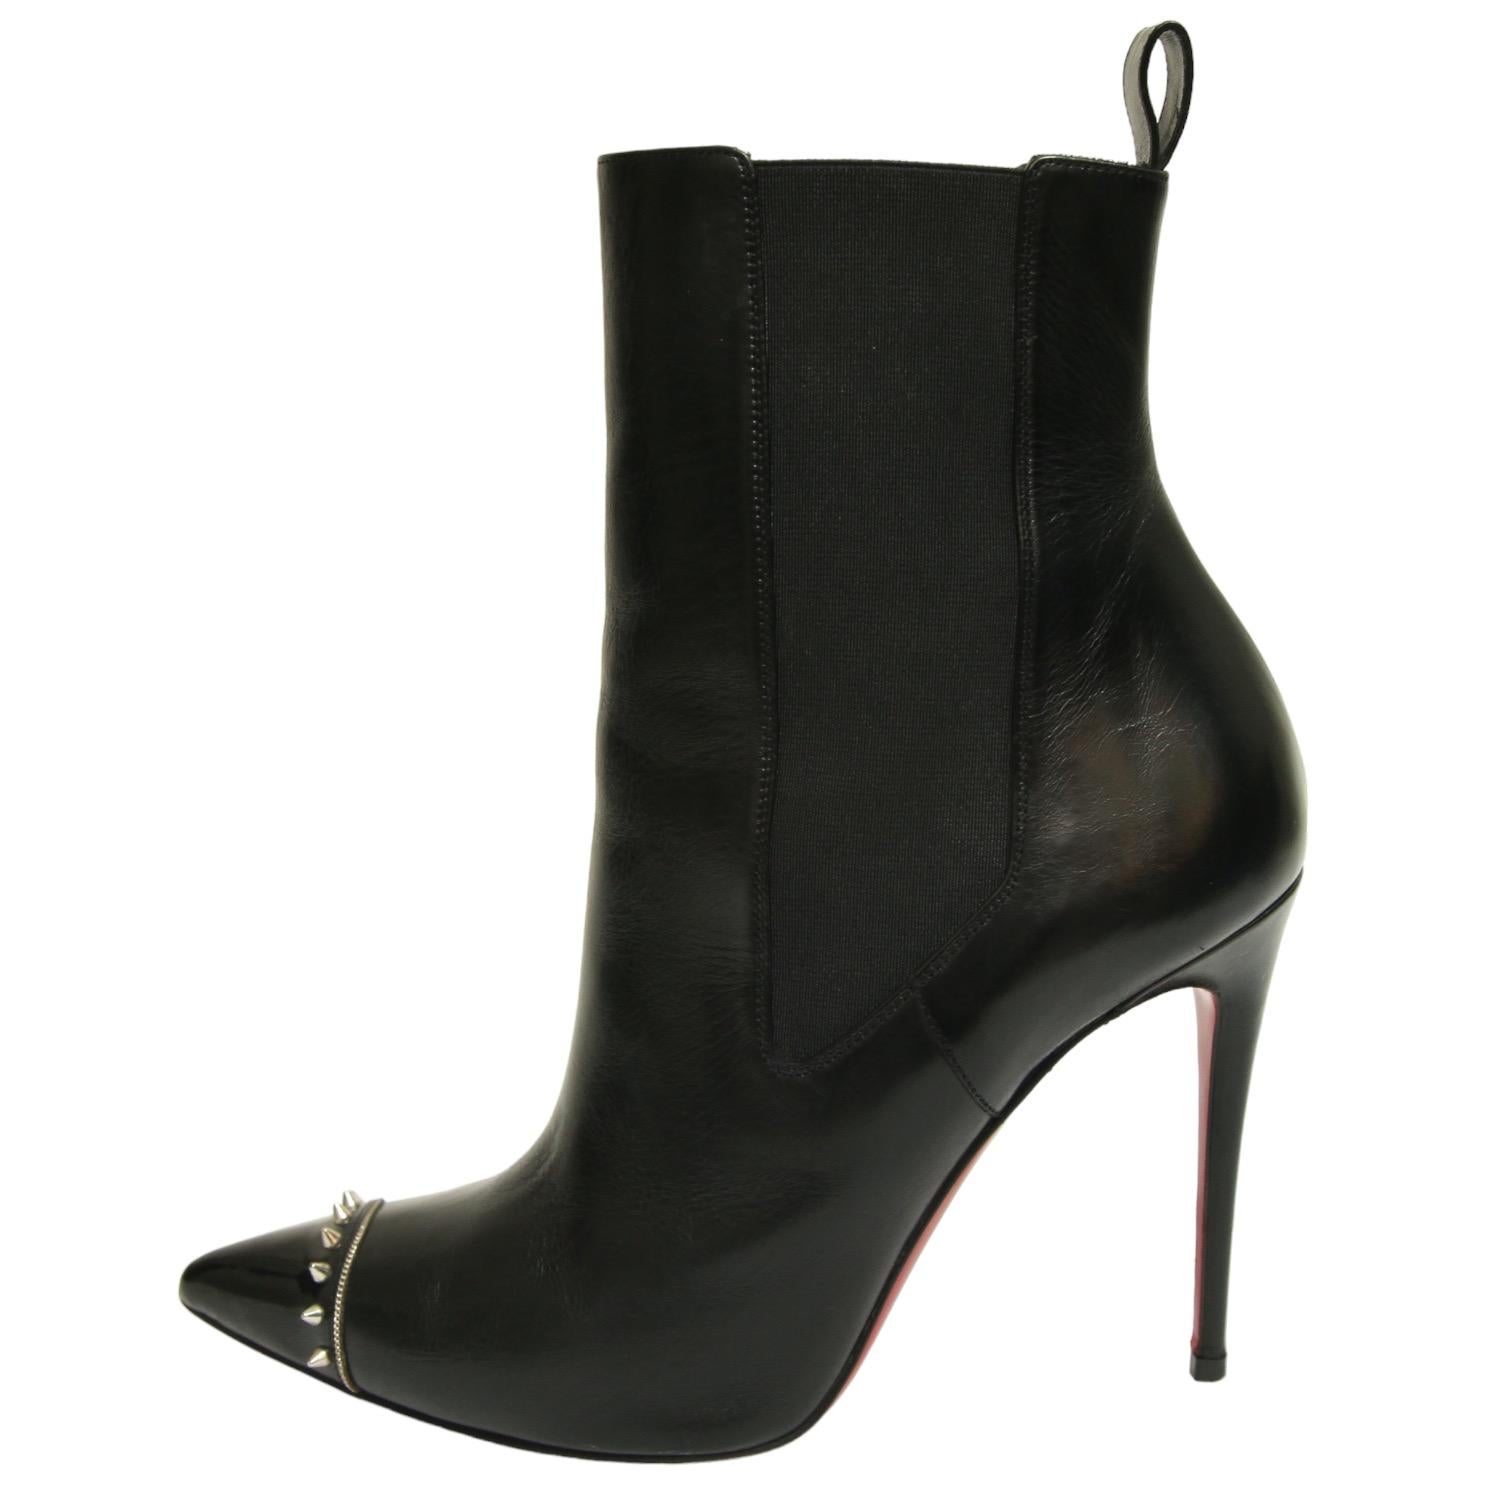 Women's CHRISTIAN LOUBOUTIN Black Leather Bootie BANJO Ankle Boot Spiked Cap Toe 38.5 For Sale